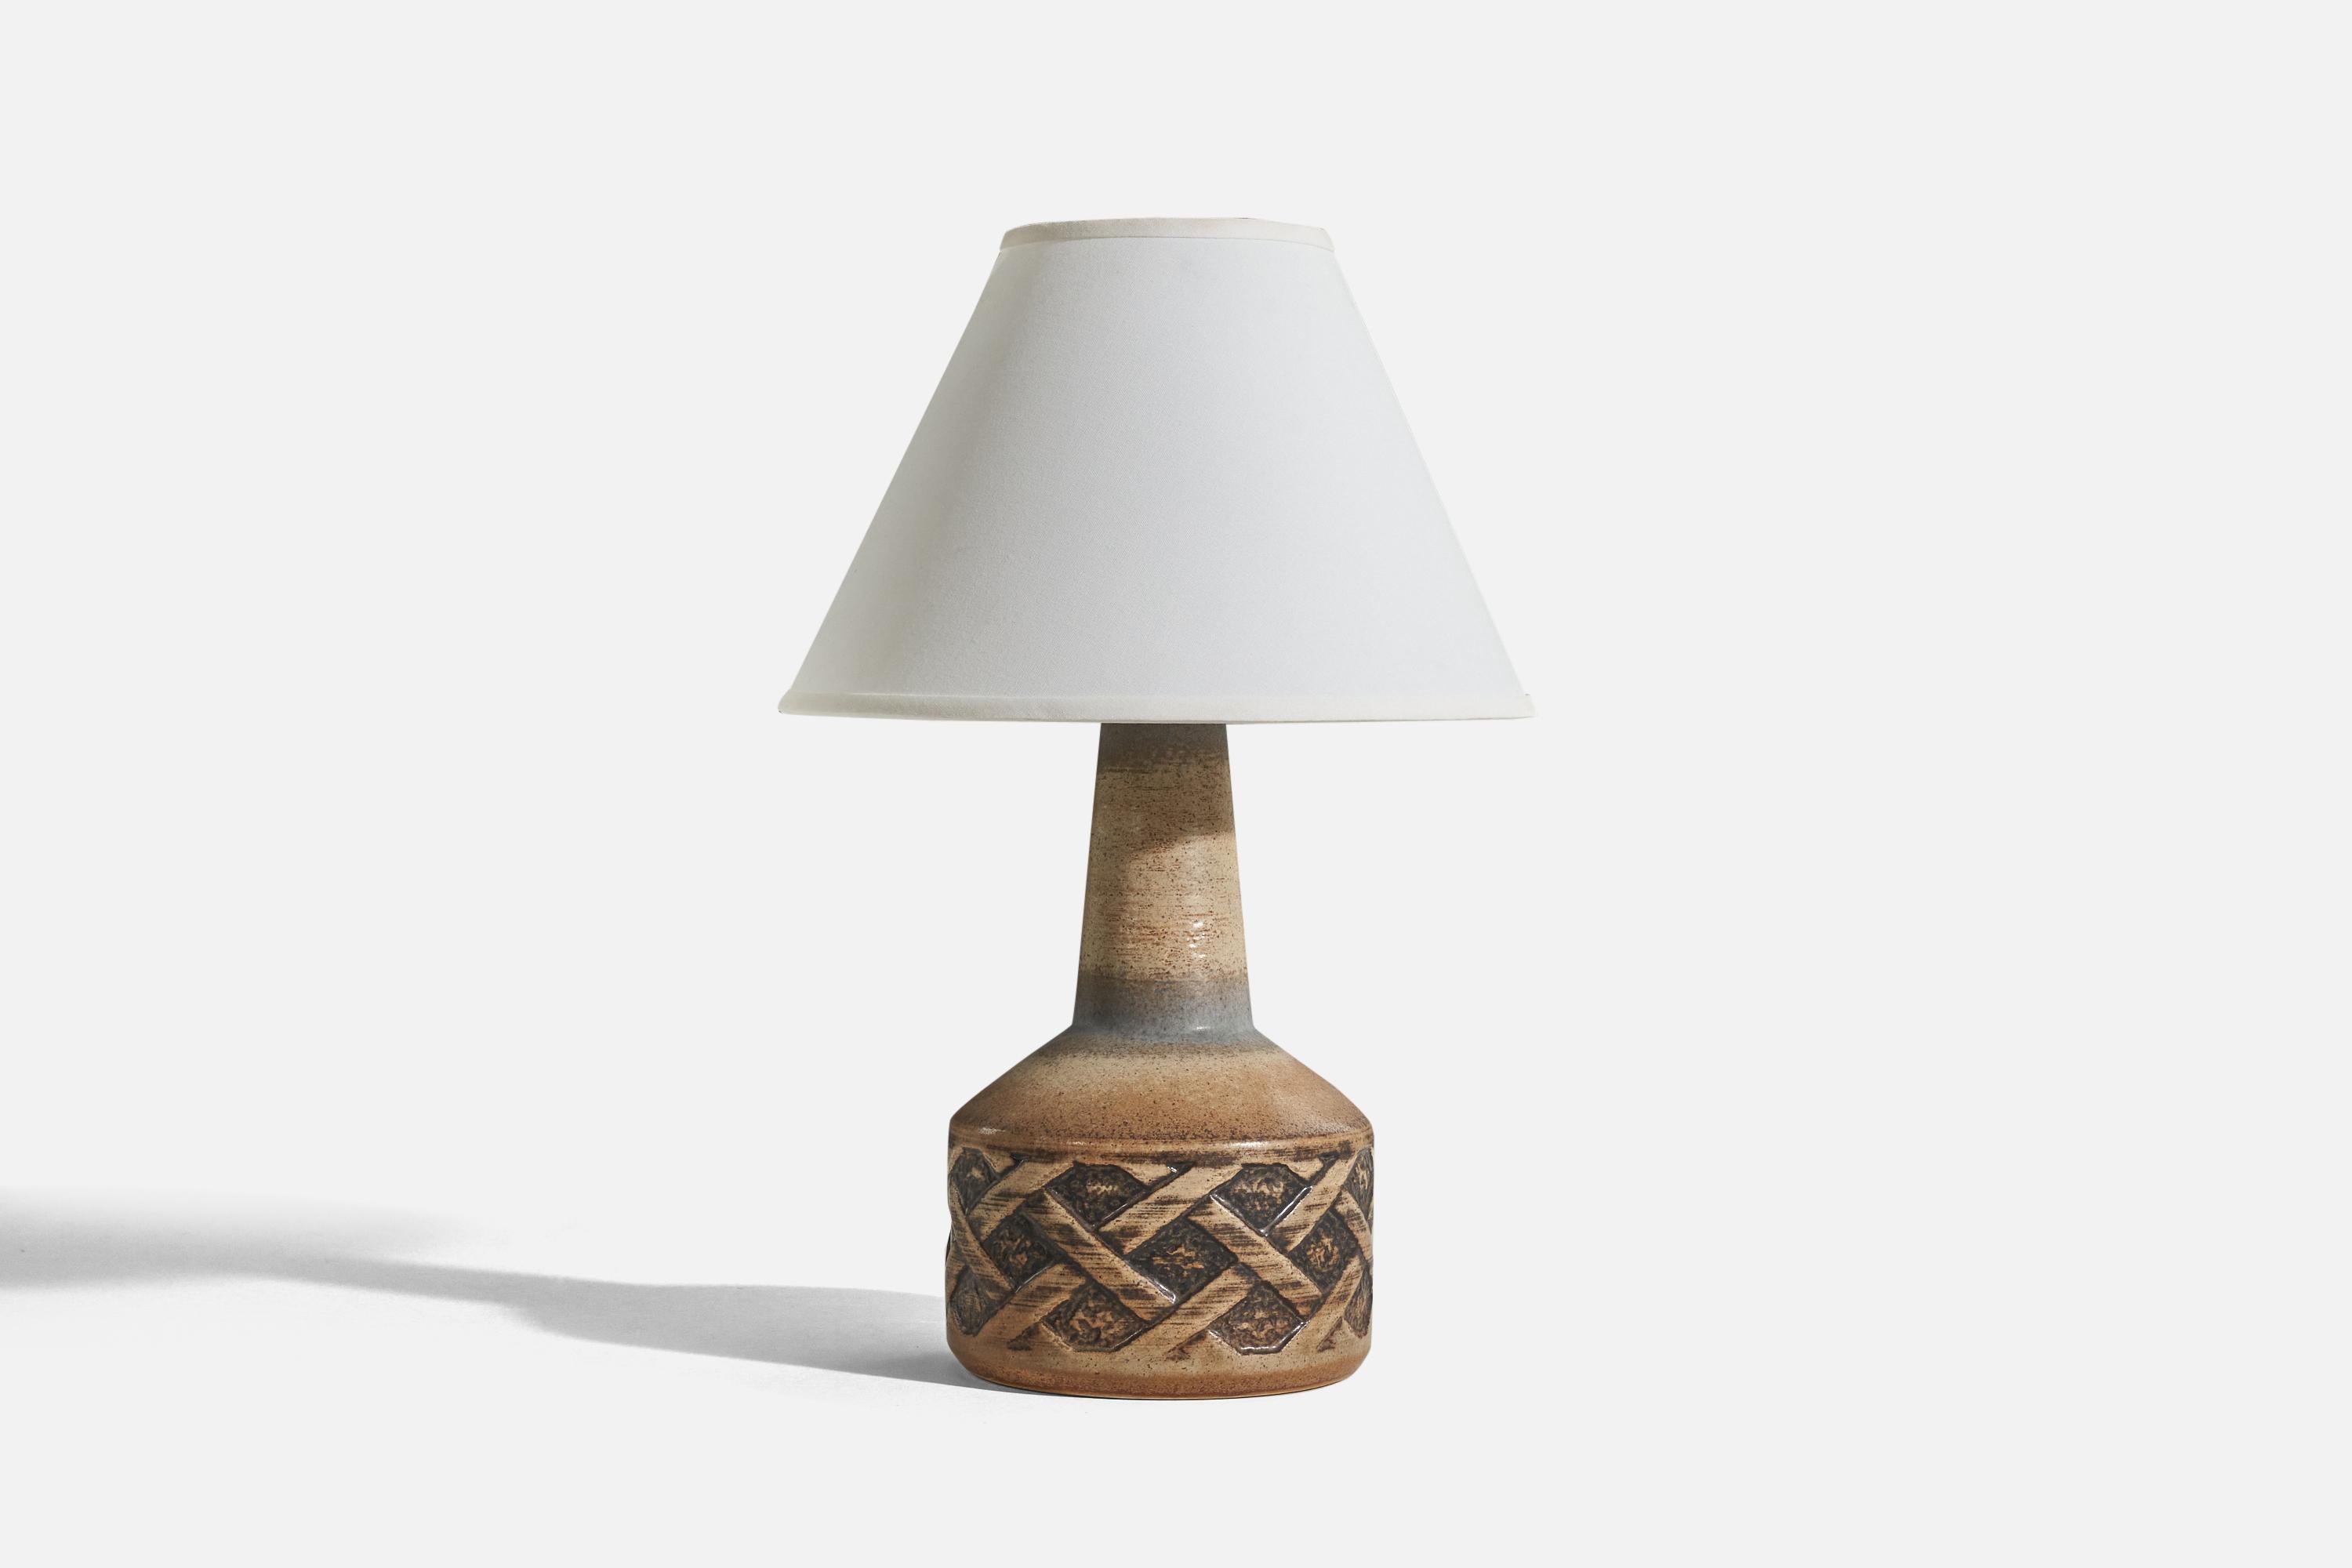 A blue and brown, glazed stoneware table lamp designed and produced by Søholm Stentøj, Denmark, c. 1960s.

Sold without lampshade. 
Dimensions of lamp (inches) : 14.75 x 7.12 x 7.12 (H x W x D)
Dimensions of shade (inches) : 5 x 12.25 x 8.75 (T